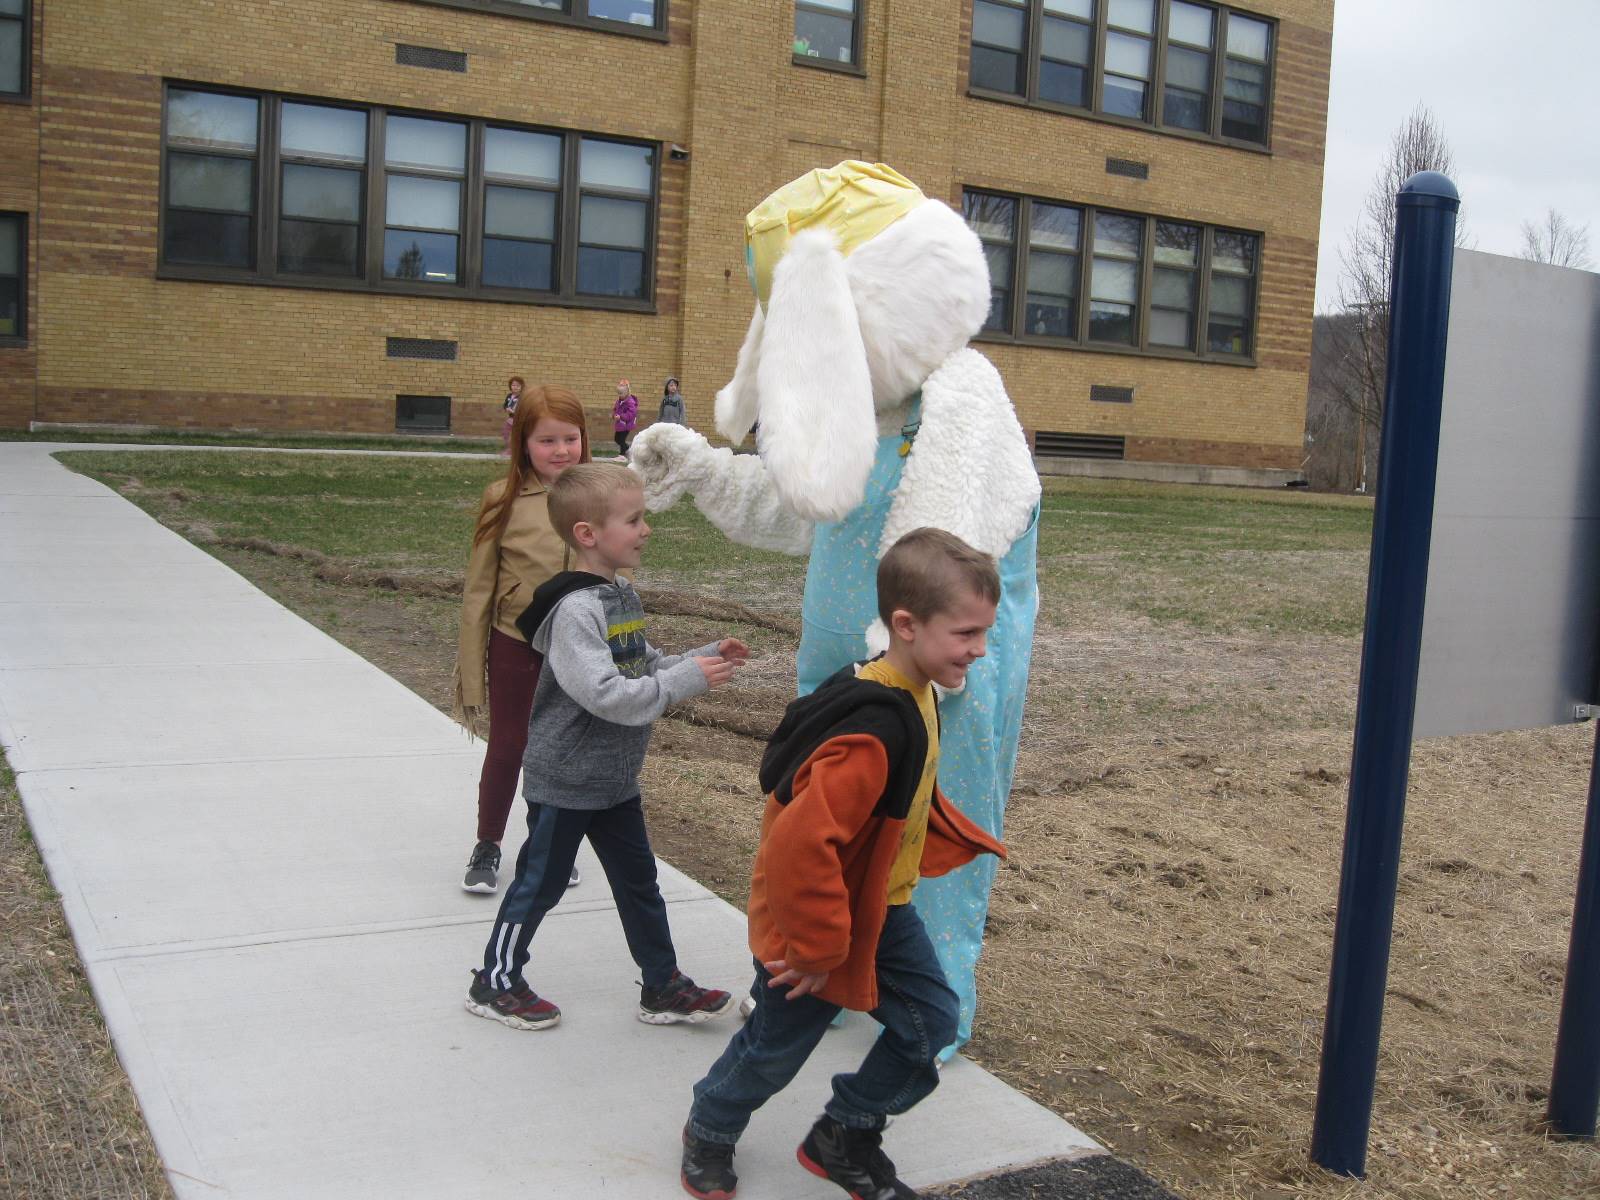 4 students give Easter Bunny a high 5!